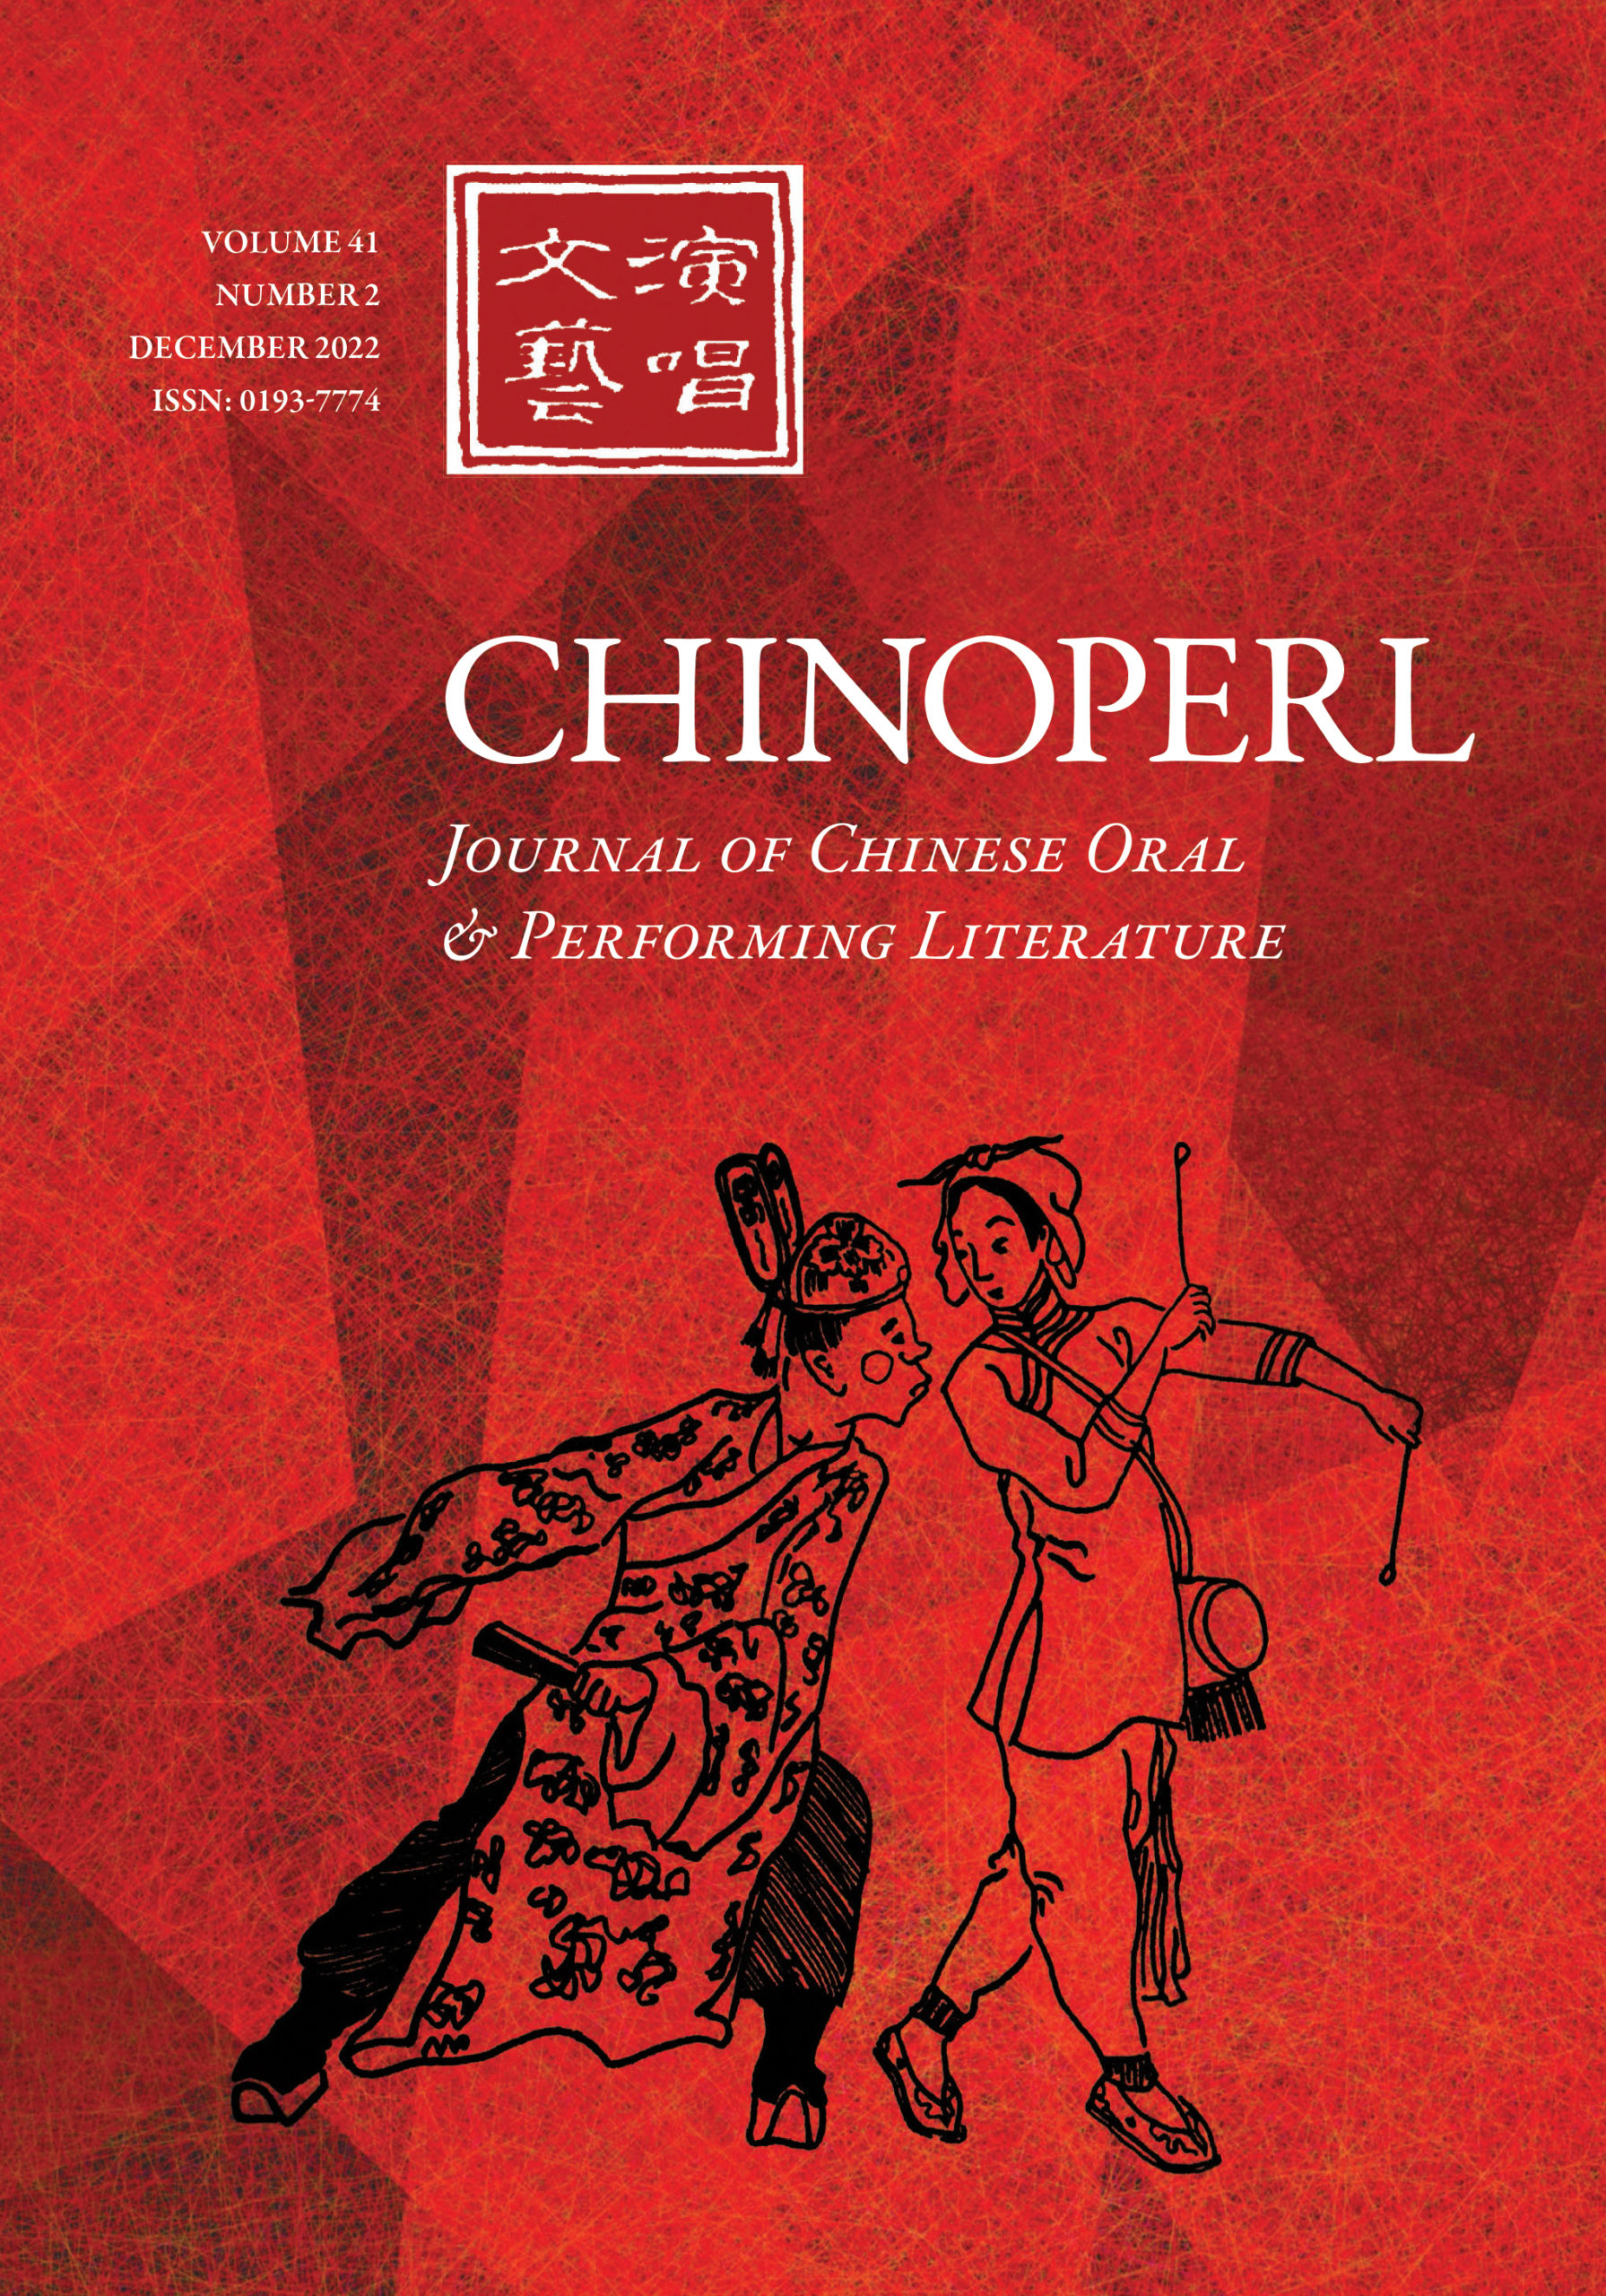 CHINOPERL: Journal of Chinese Oral and Performing Literature